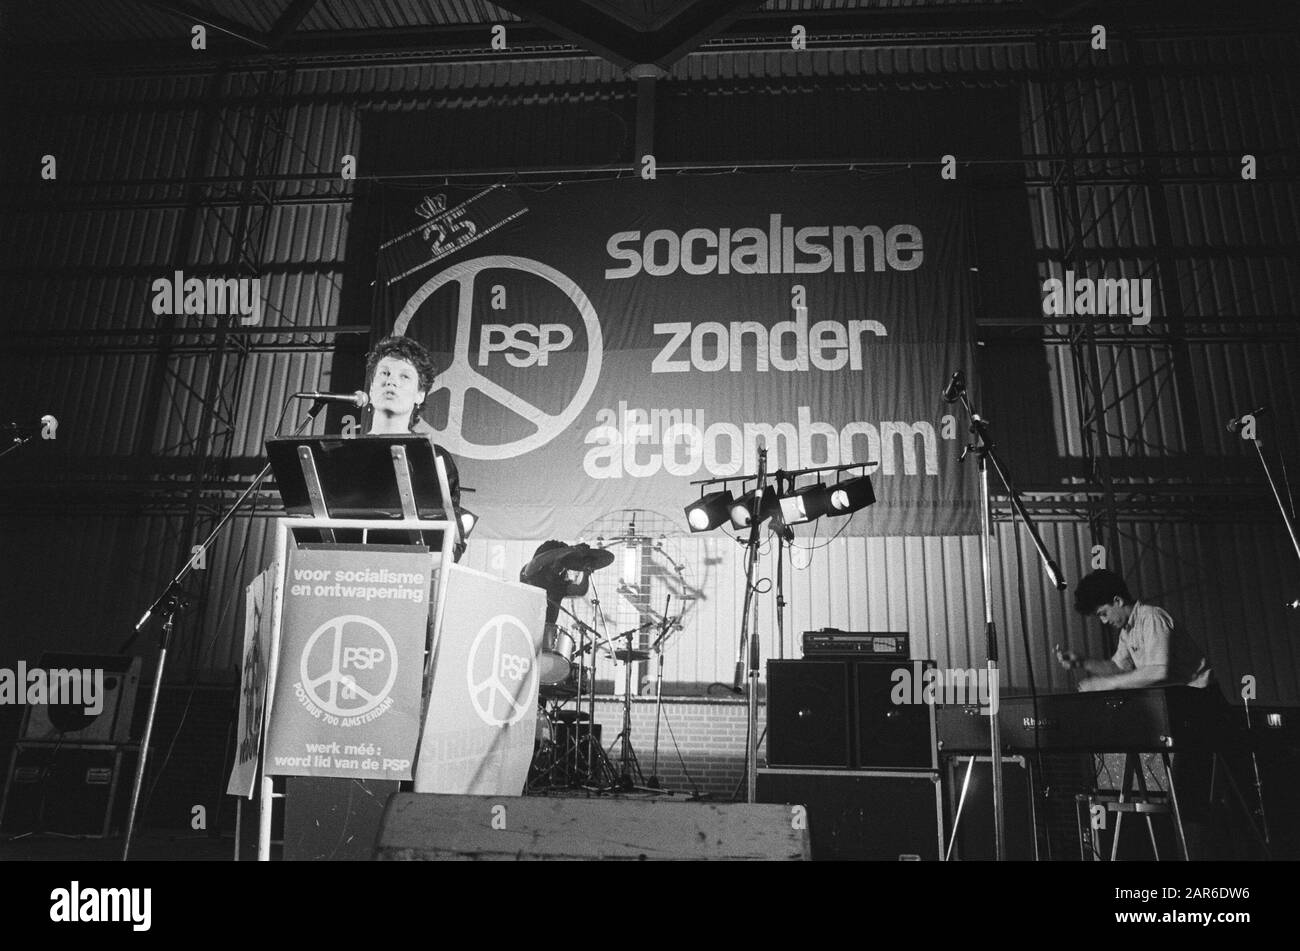 Manifestation 25 years PSP in Expohal in Hilversum; Andrée van Es speaking, with large banner of PSP in background Date: May 22, 1982 Location: Hilversum, Noord-Holland Keywords: events, banners Personal name: Es, Andrée of Institution Name: PSP Stock Photo